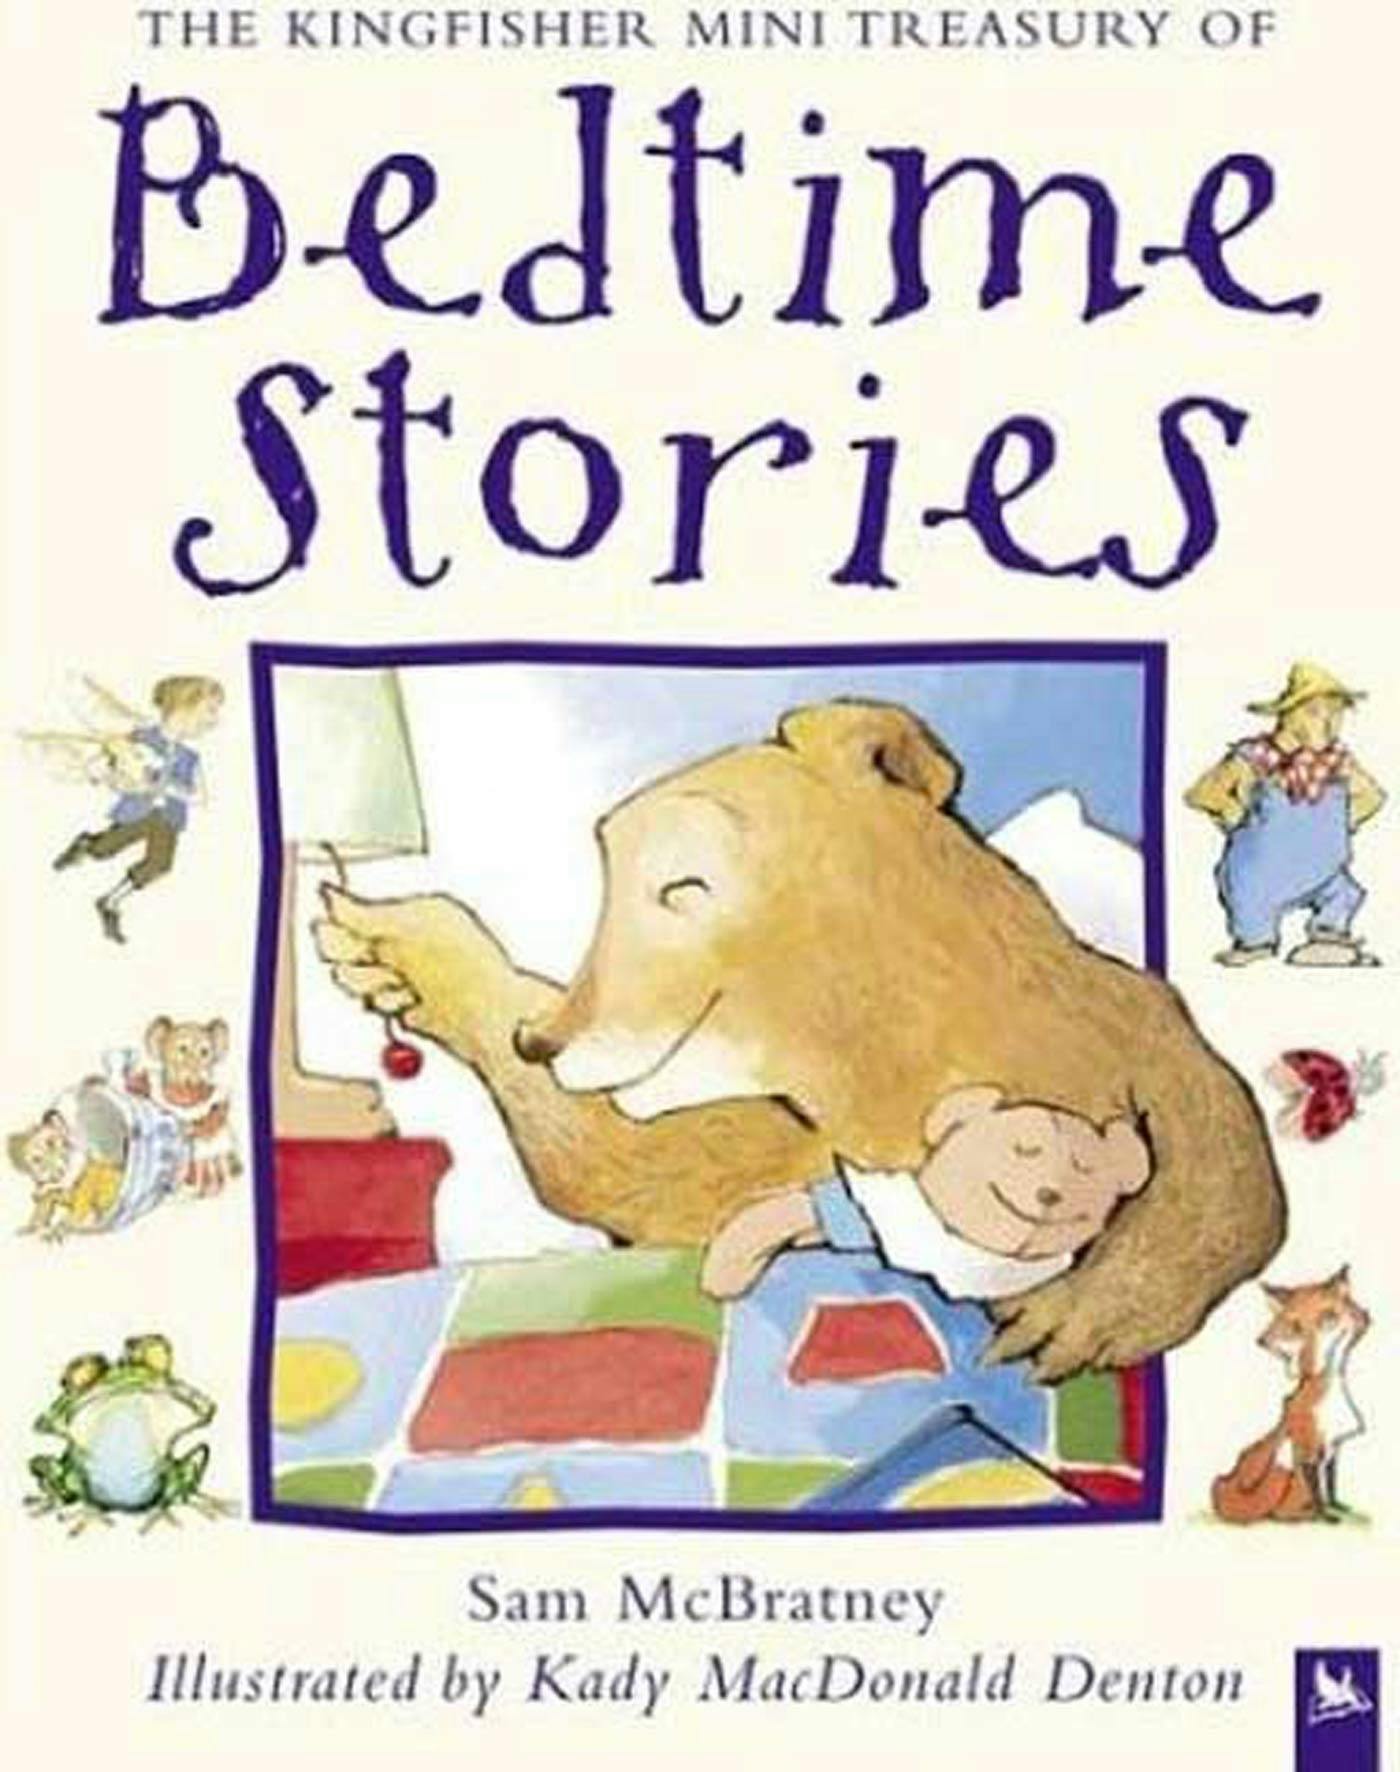 Image of The Kingfisher Mini Treasury of Bedtime Stories